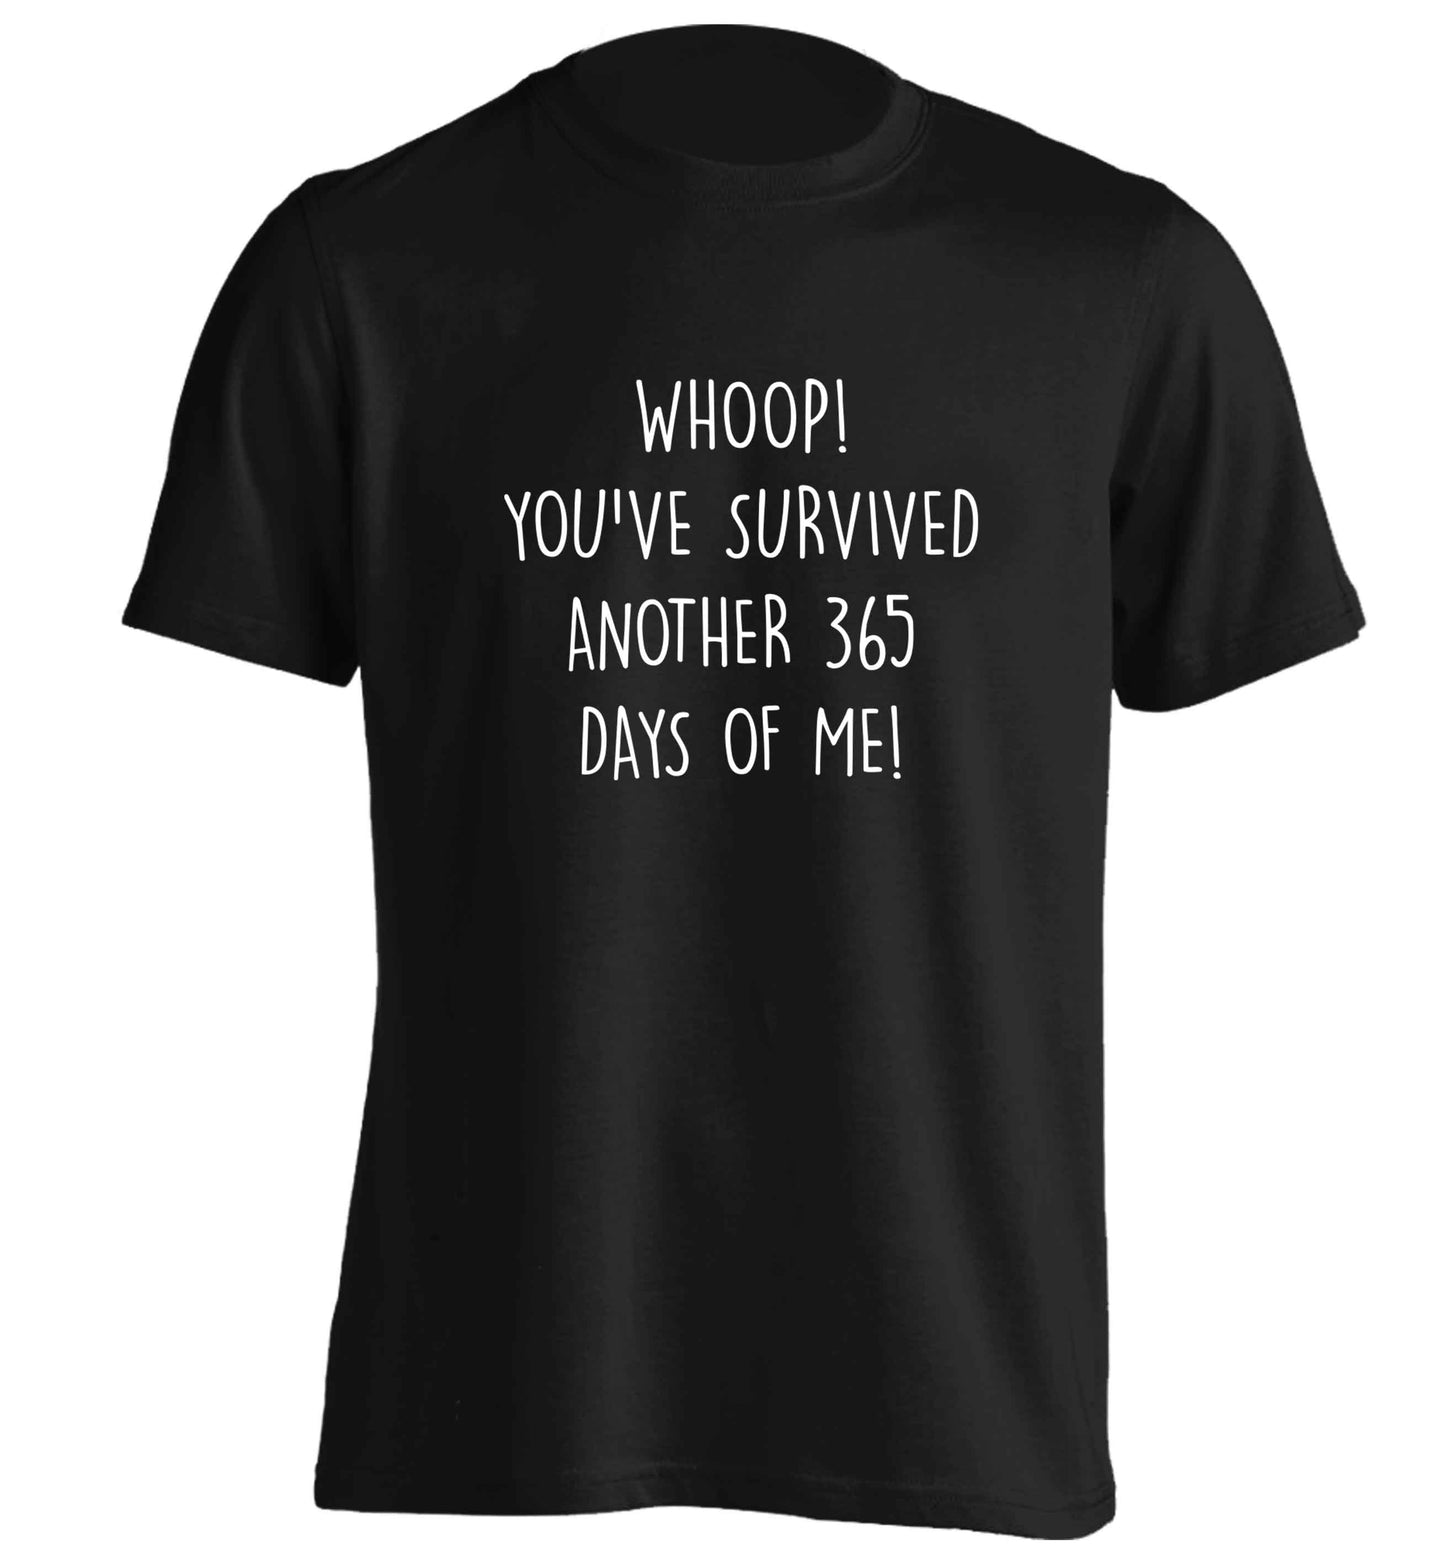 Whoop! You've survived another 365 days with me! adults unisex black Tshirt 2XL